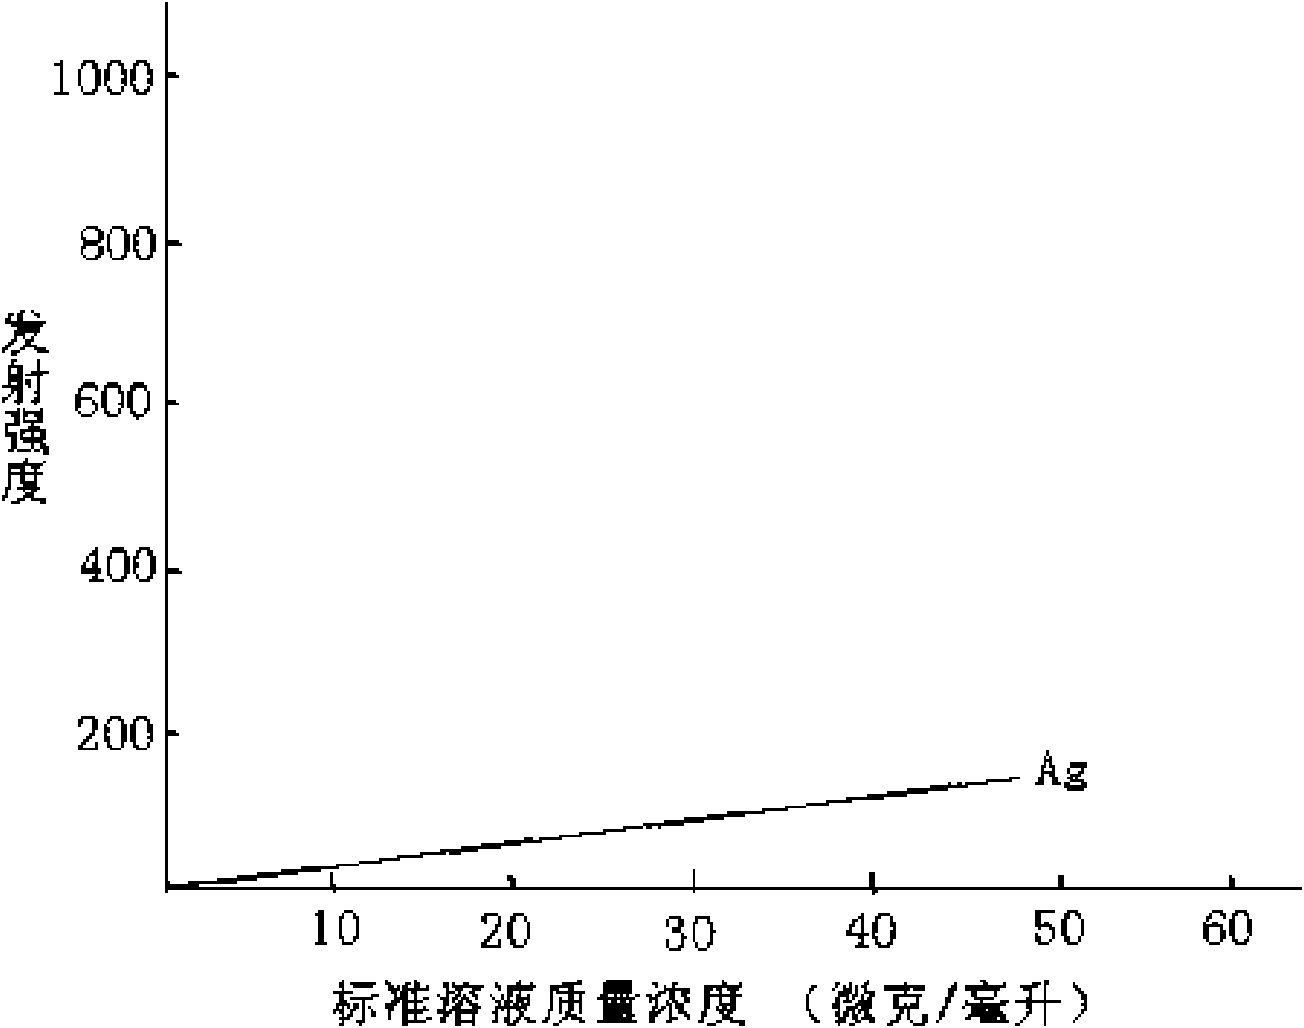 Method for analyzing and detecting alloying elements in beryllium-aluminum alloy